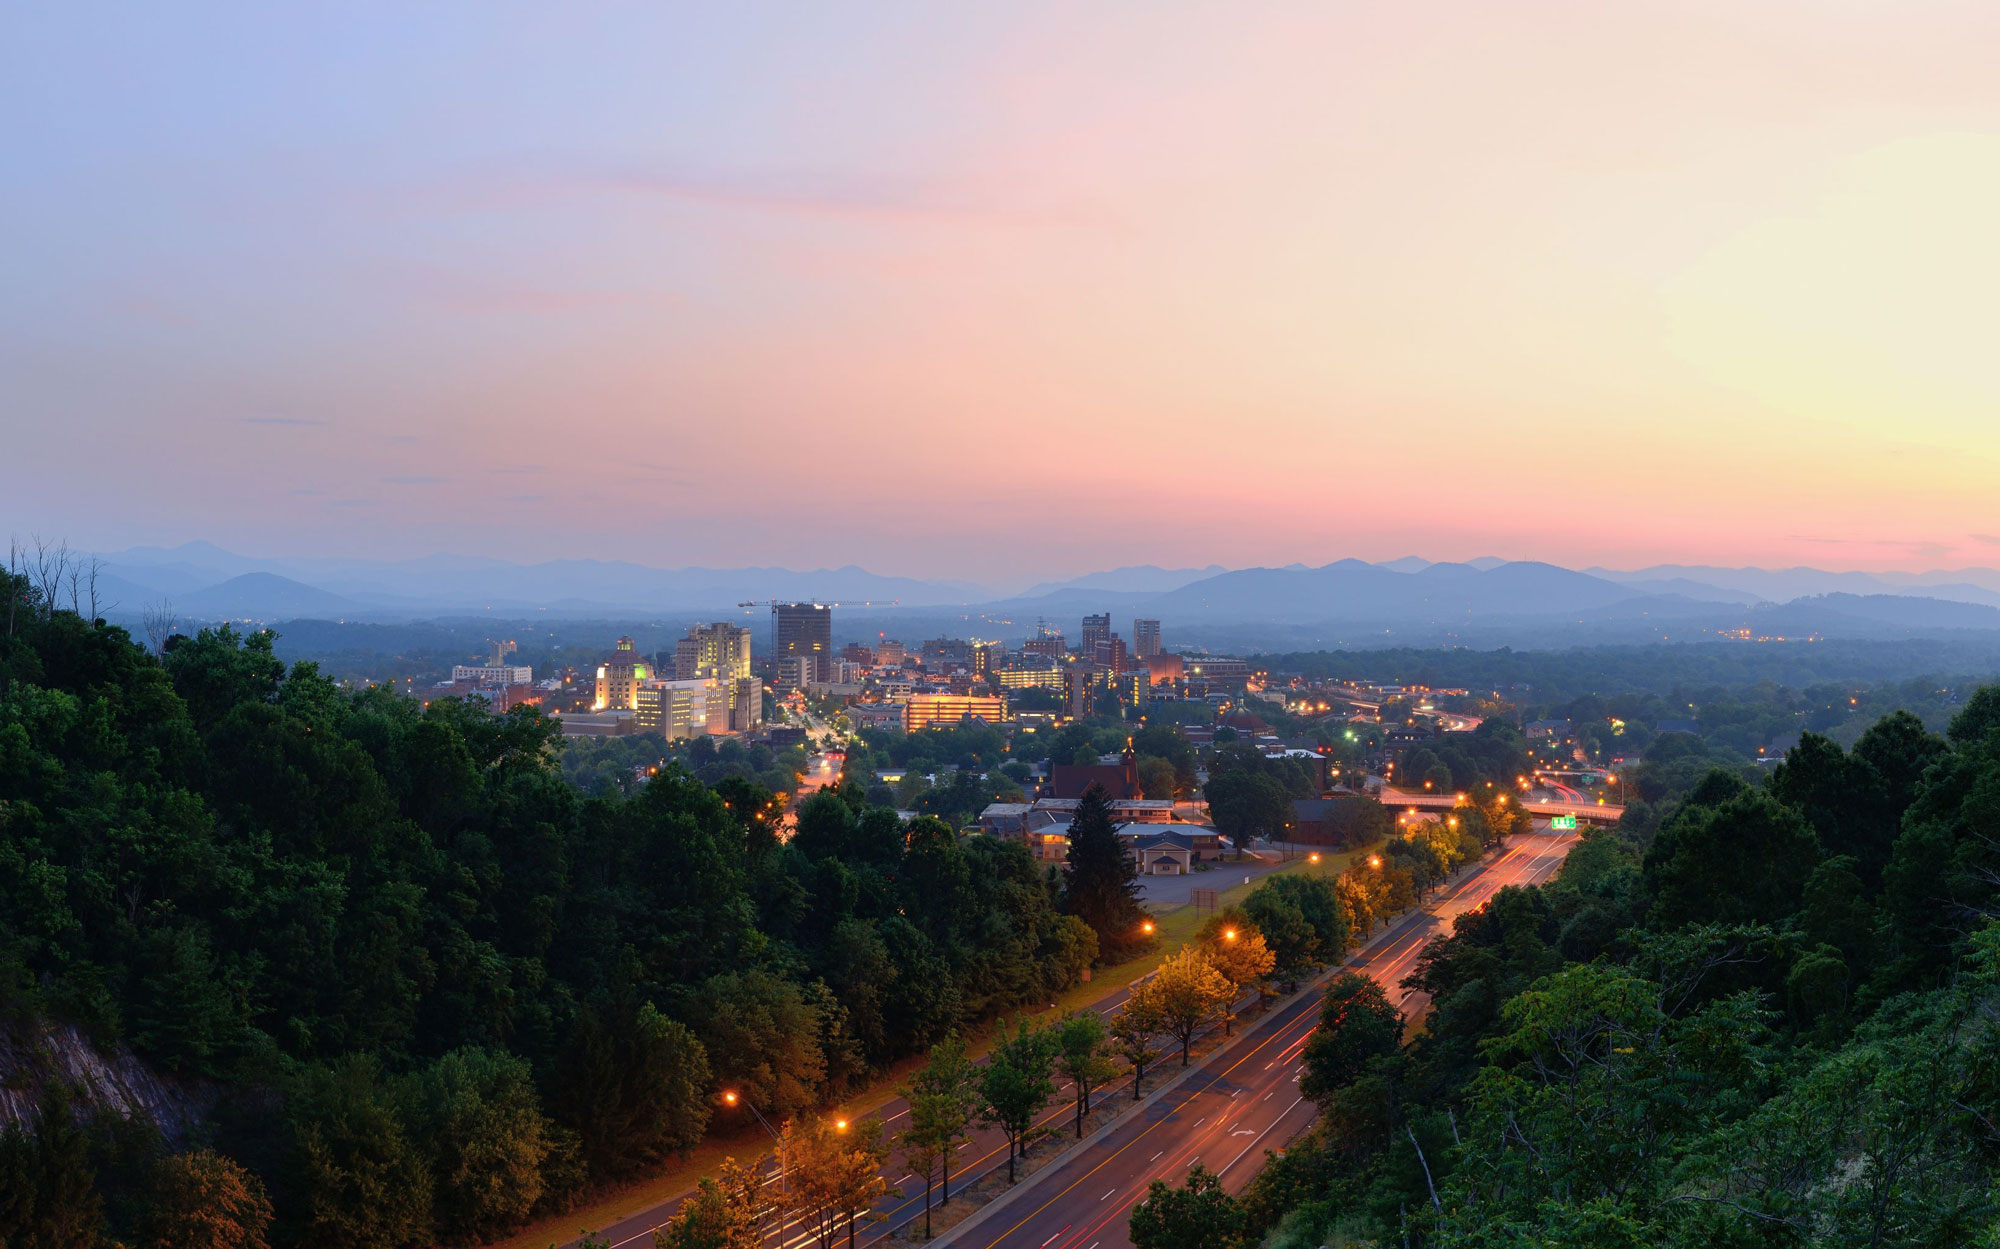 Downtown Asheville | The City of Asheville